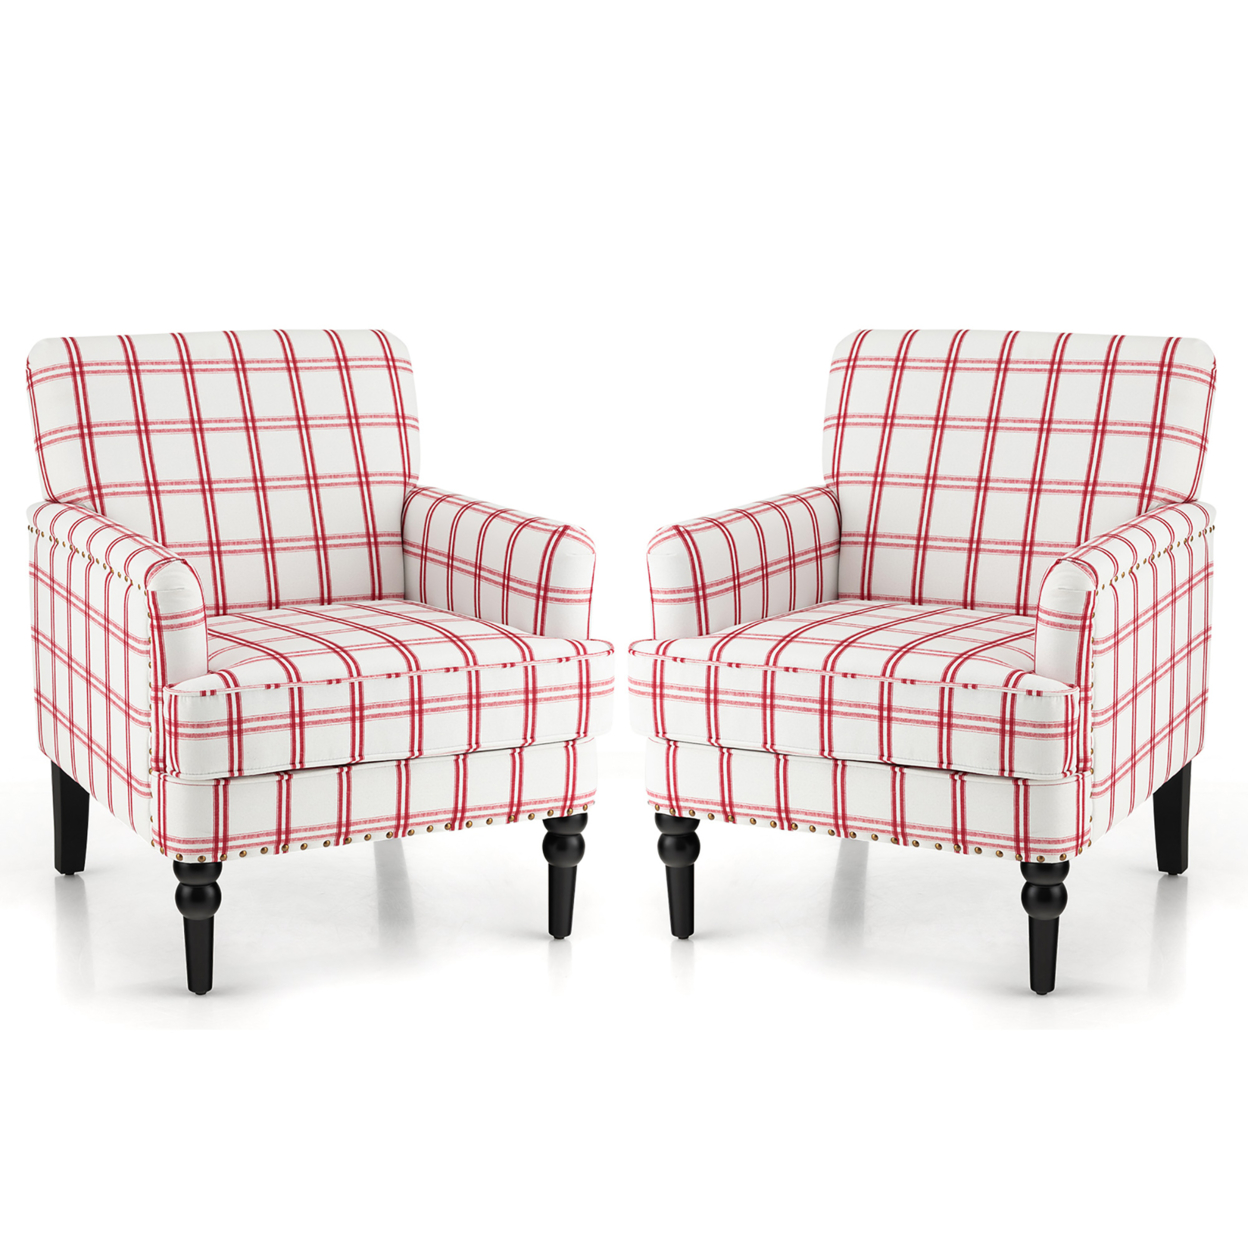 Set Of 2 Modern Accent Chair Upholstered Sofa Chair W/ Rubber Wood Legs - Red Checkerboard